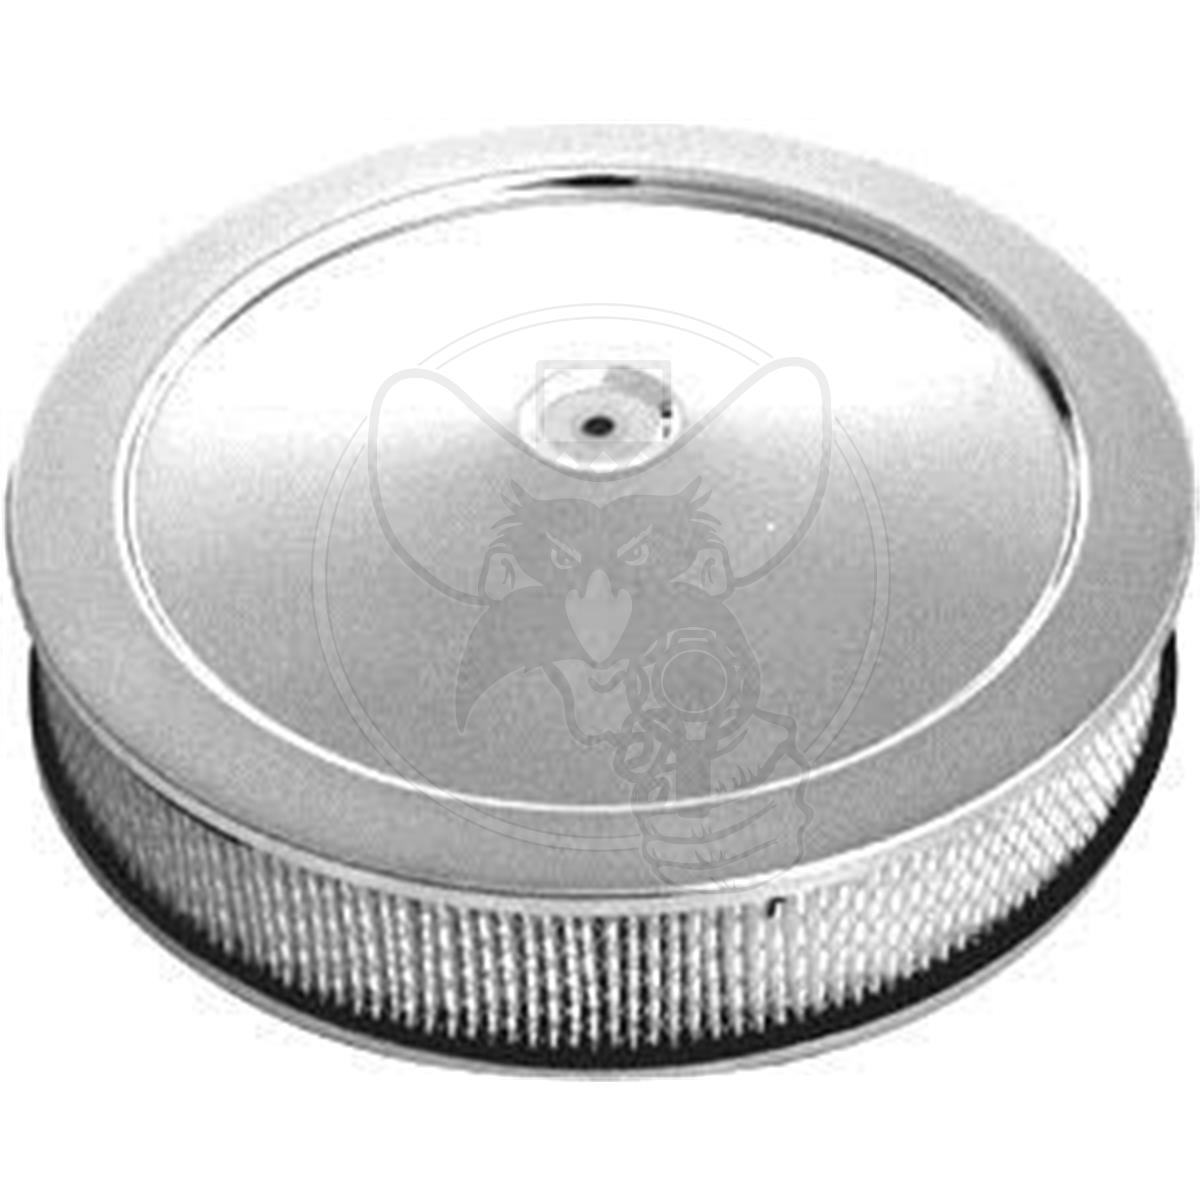 RPC CHROME AIR CLEANER ASSEMBLY FITS HOLLEY 14" X 3" RECESSED BASE